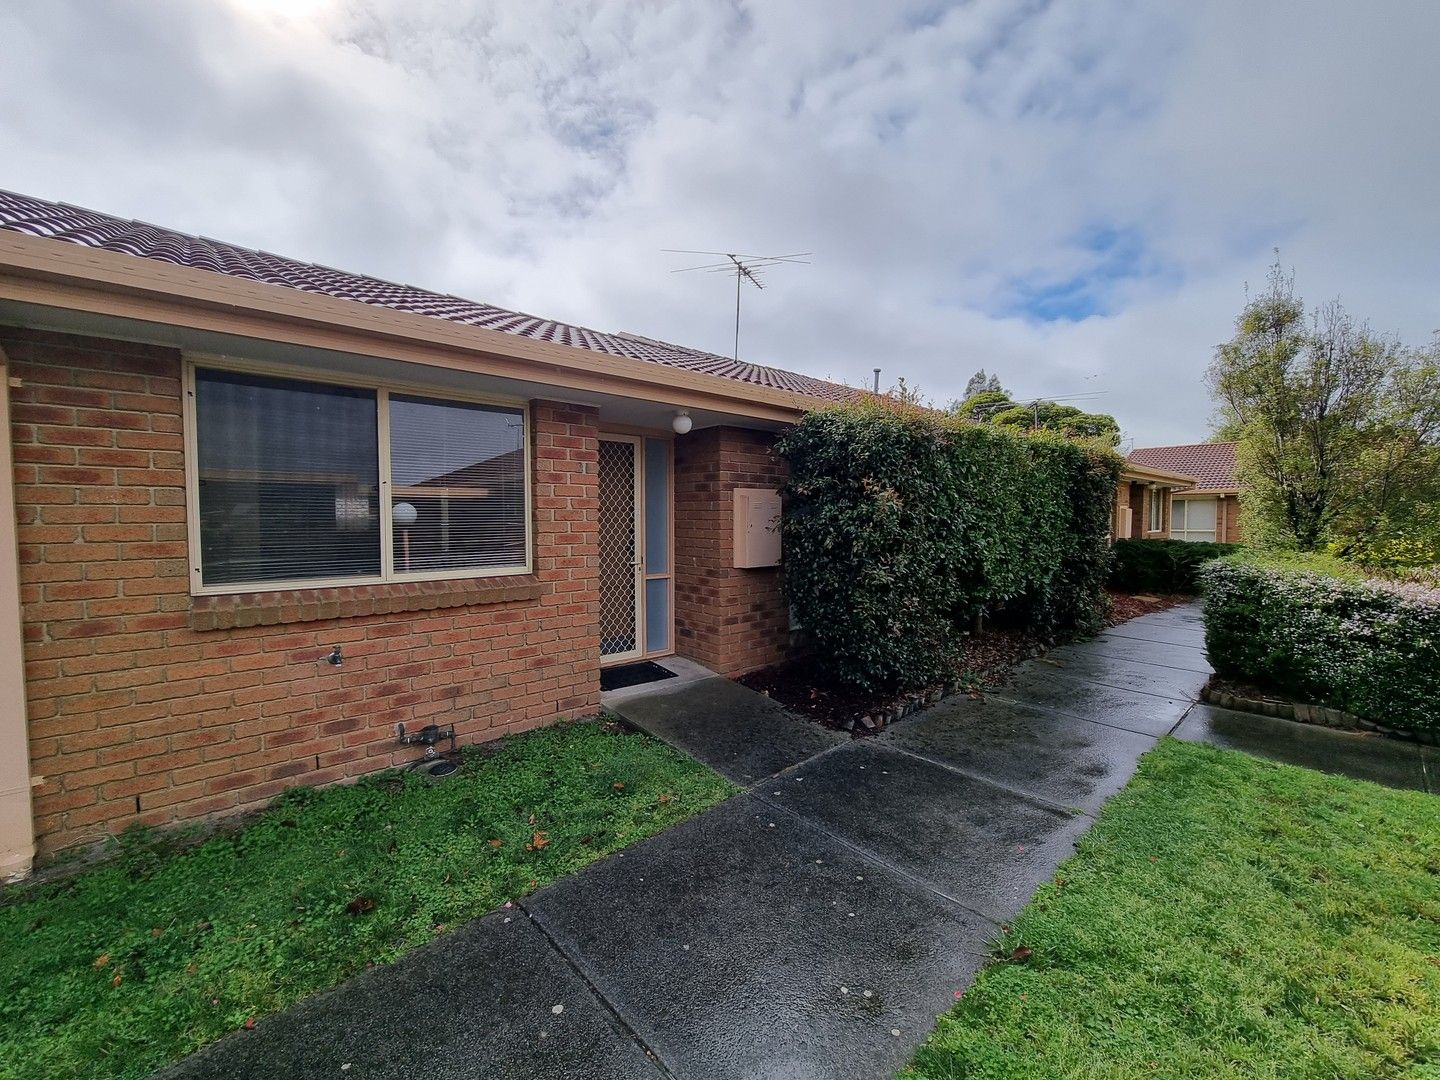 21/36-44 Bourke Road, Oakleigh South VIC 3167, Image 0